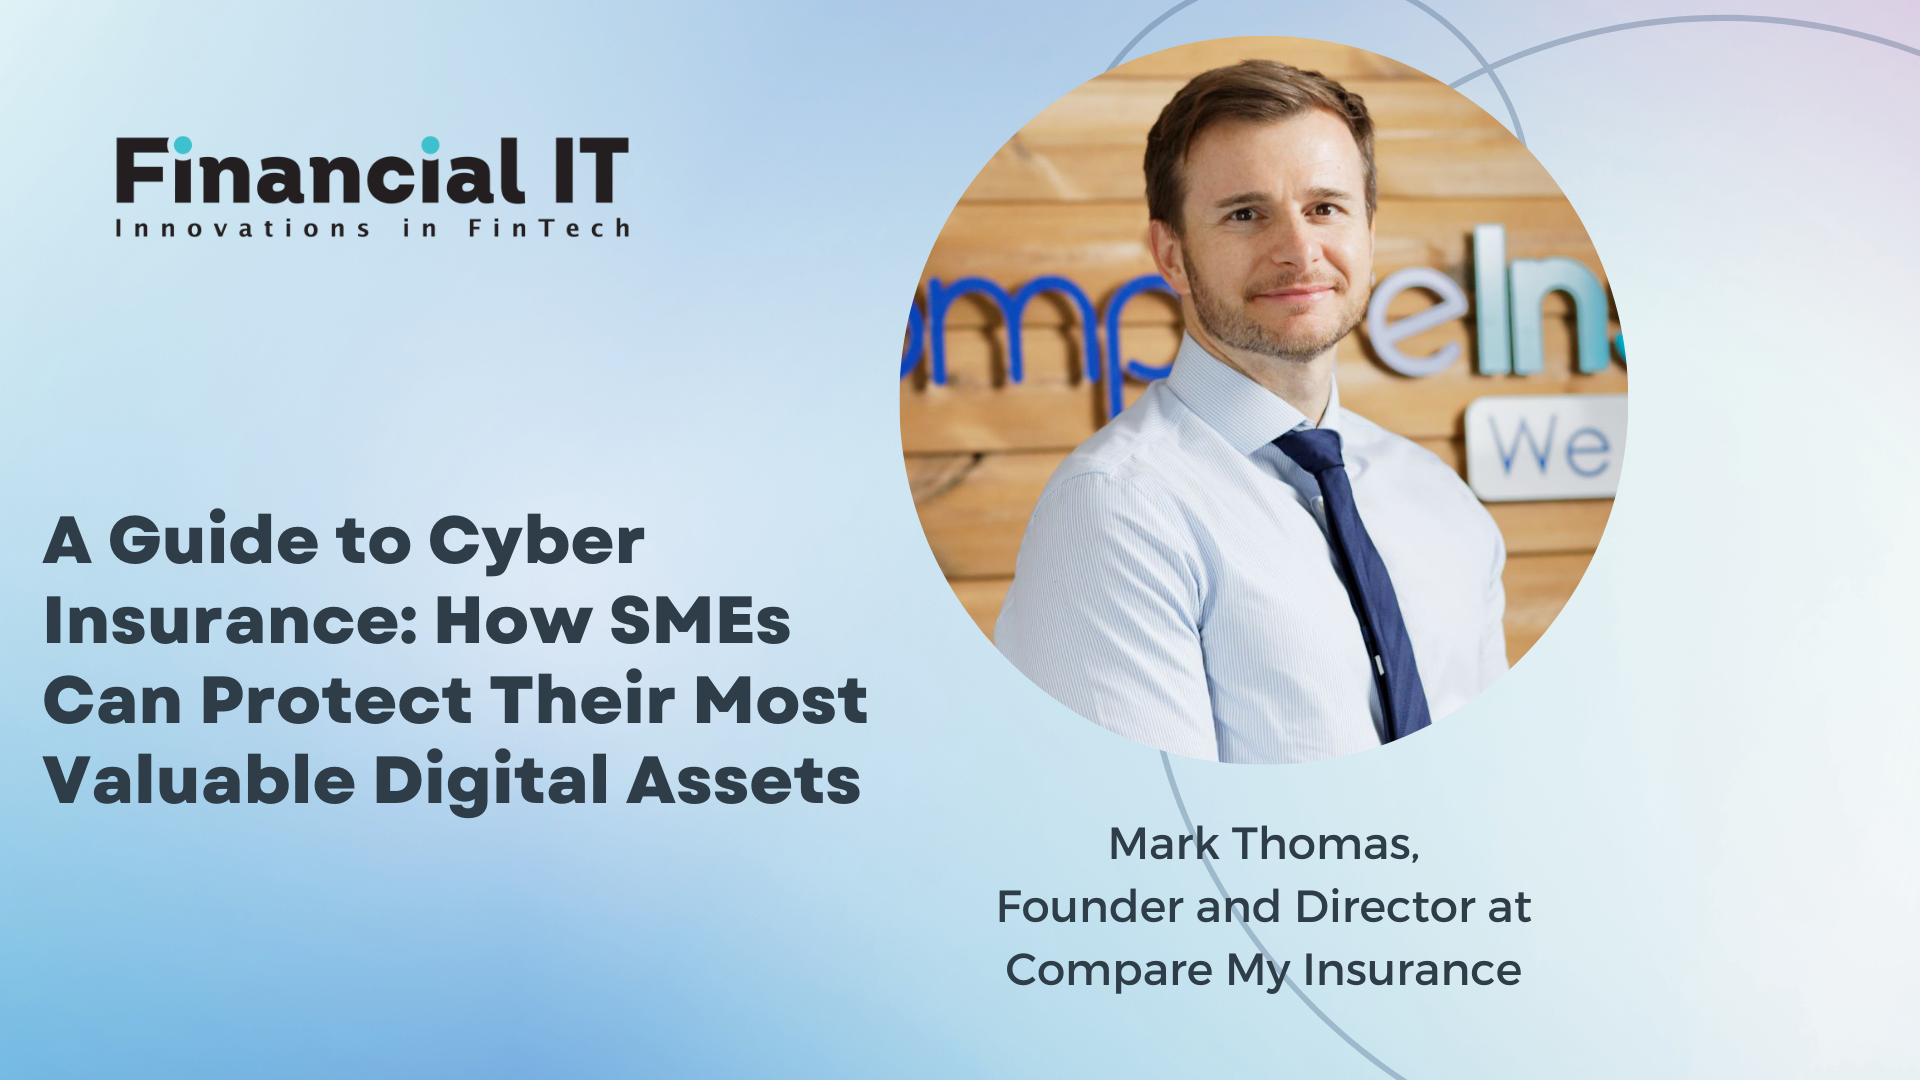 A Guide to Cyber Insurance: How SMEs Can Protect Their Most Valuable Digital Assets